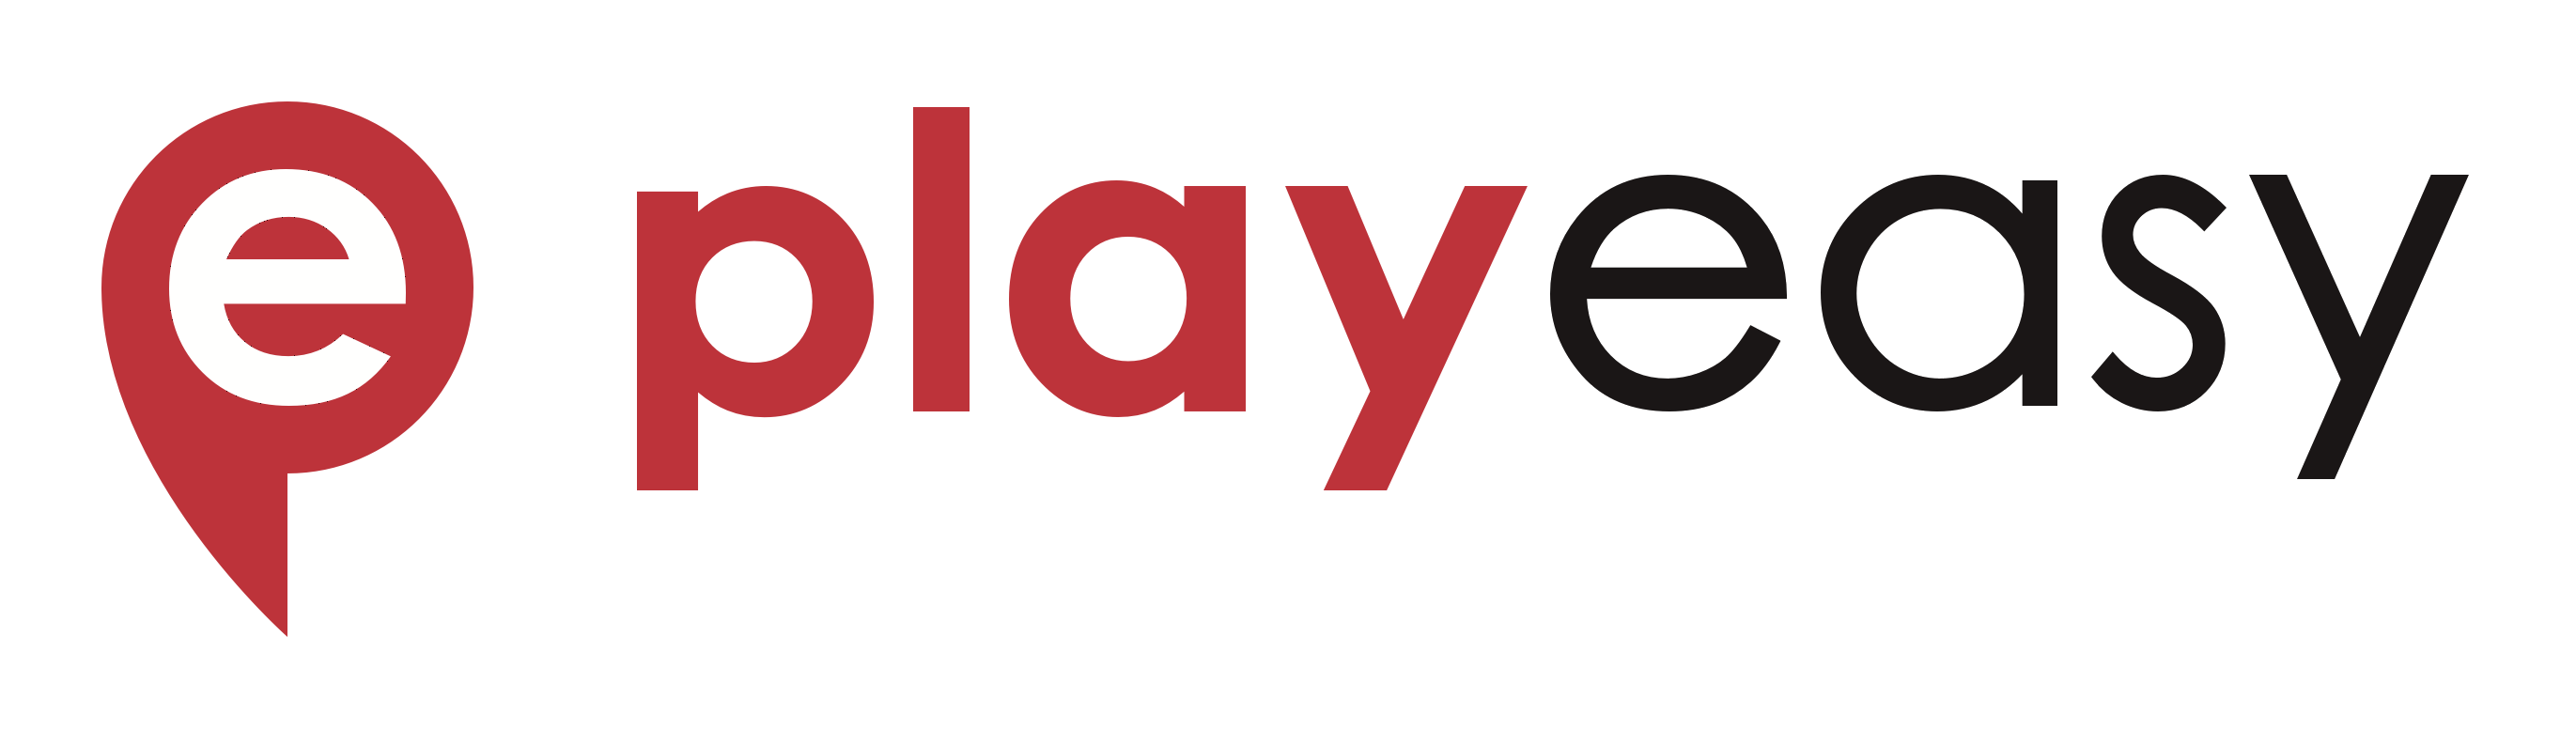 playeasy.com on X: Playeasy is the way of the future. Don't take our word  for it, take our partner's! Nick Kleva from @visitsouthbend was kind enough  to share his thoughts on his